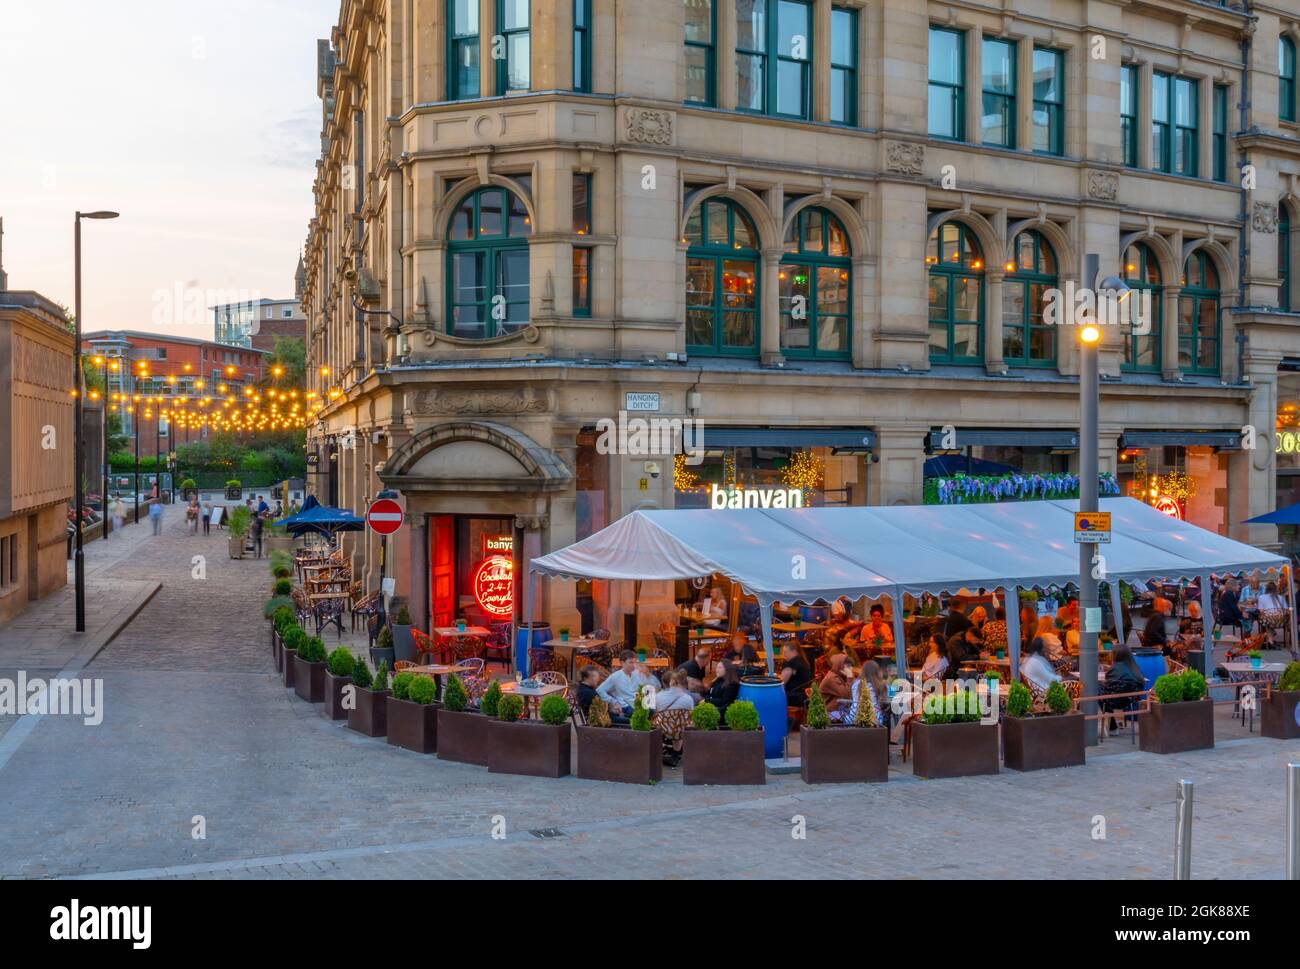 View of The Corn Echange restaurant in Exchange Square at dusk, Manchester, Lancashire, England, United Kingdom, Europe Stock Photo